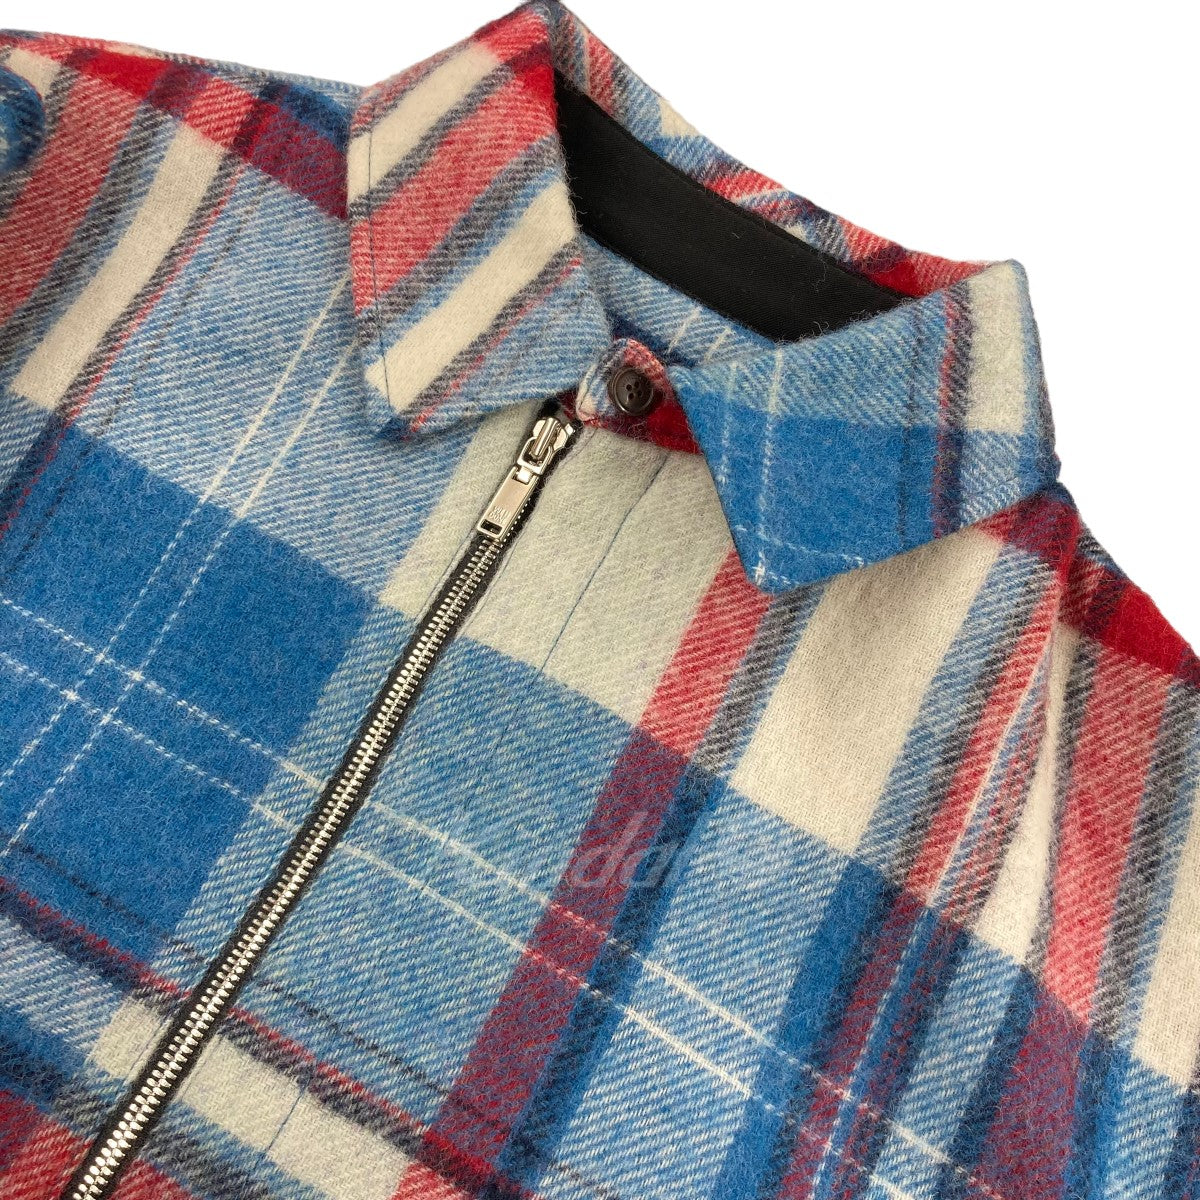 WE11DONE(ウェルダン) 「Blue WD Check Anorak Wool Shirt」 シャツ ...